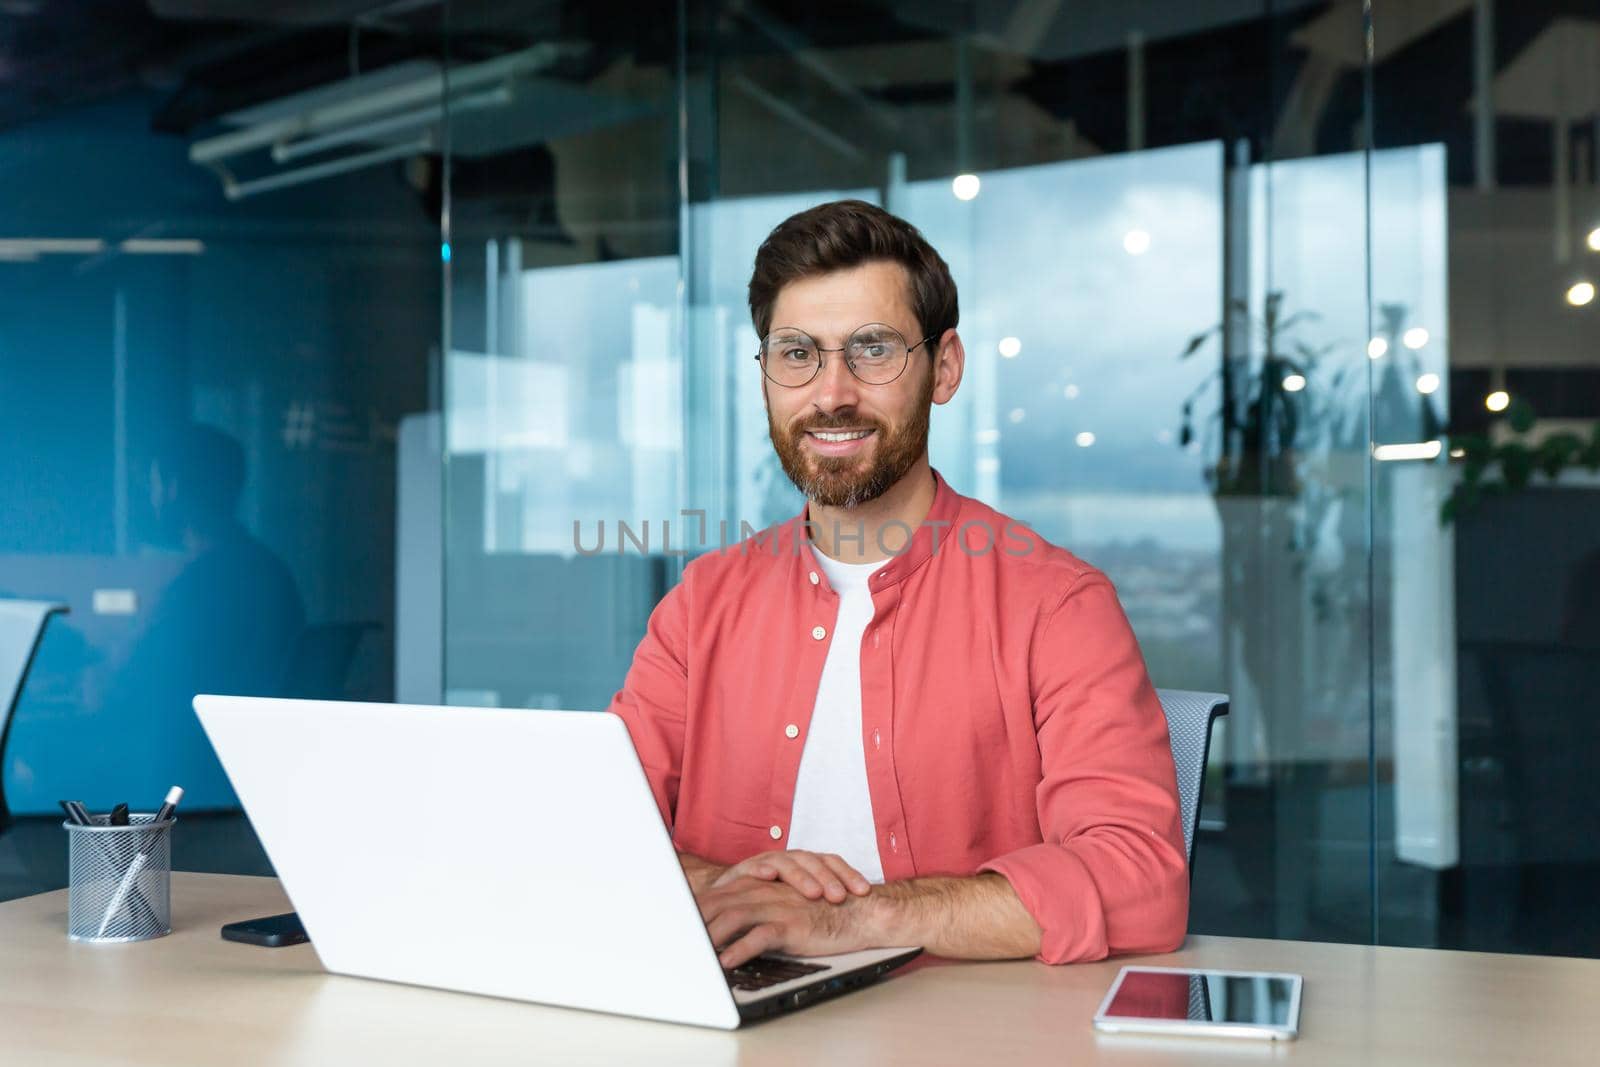 Portrait of mature businessman freelancer startup, bearded man smiling and looking at camera, business owner working inside modern office building wearing red shirt and glasses.